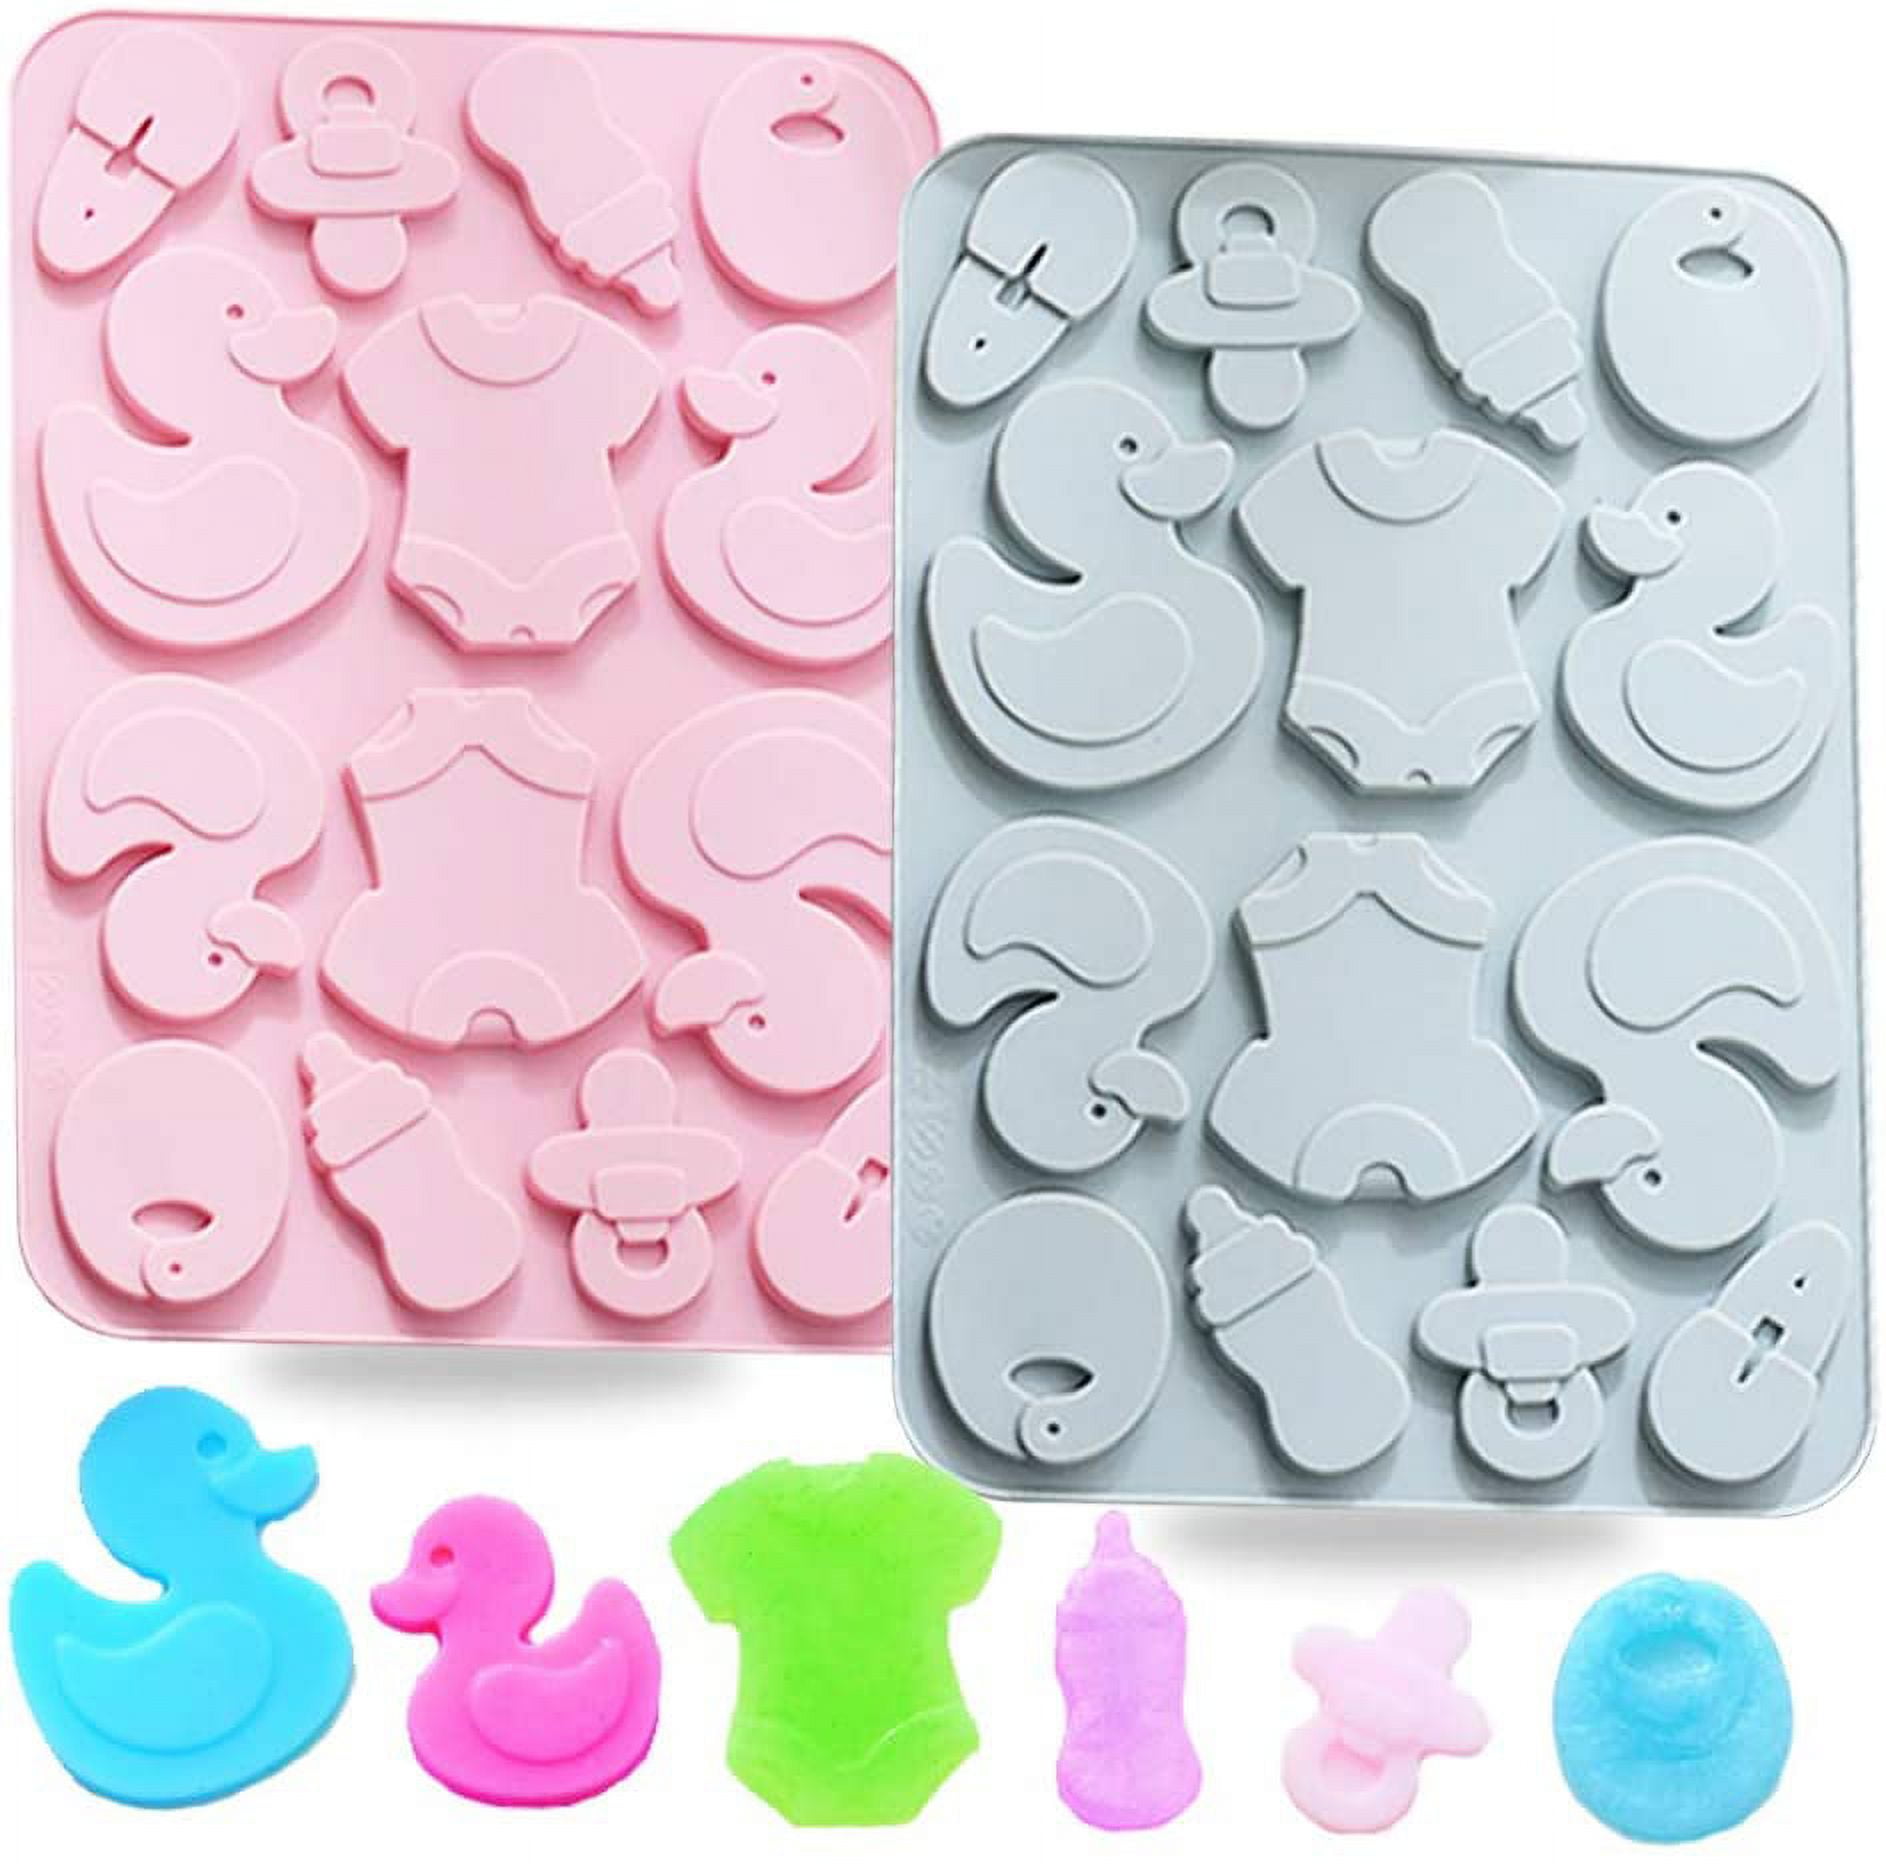 Muyulin Baby Shower Fondant Molds (5 Pack), Cute Silicone Chocolate, Feet Molds, Clothes Decorate Mould for Baby Baptism Theme Party, Cake Baking